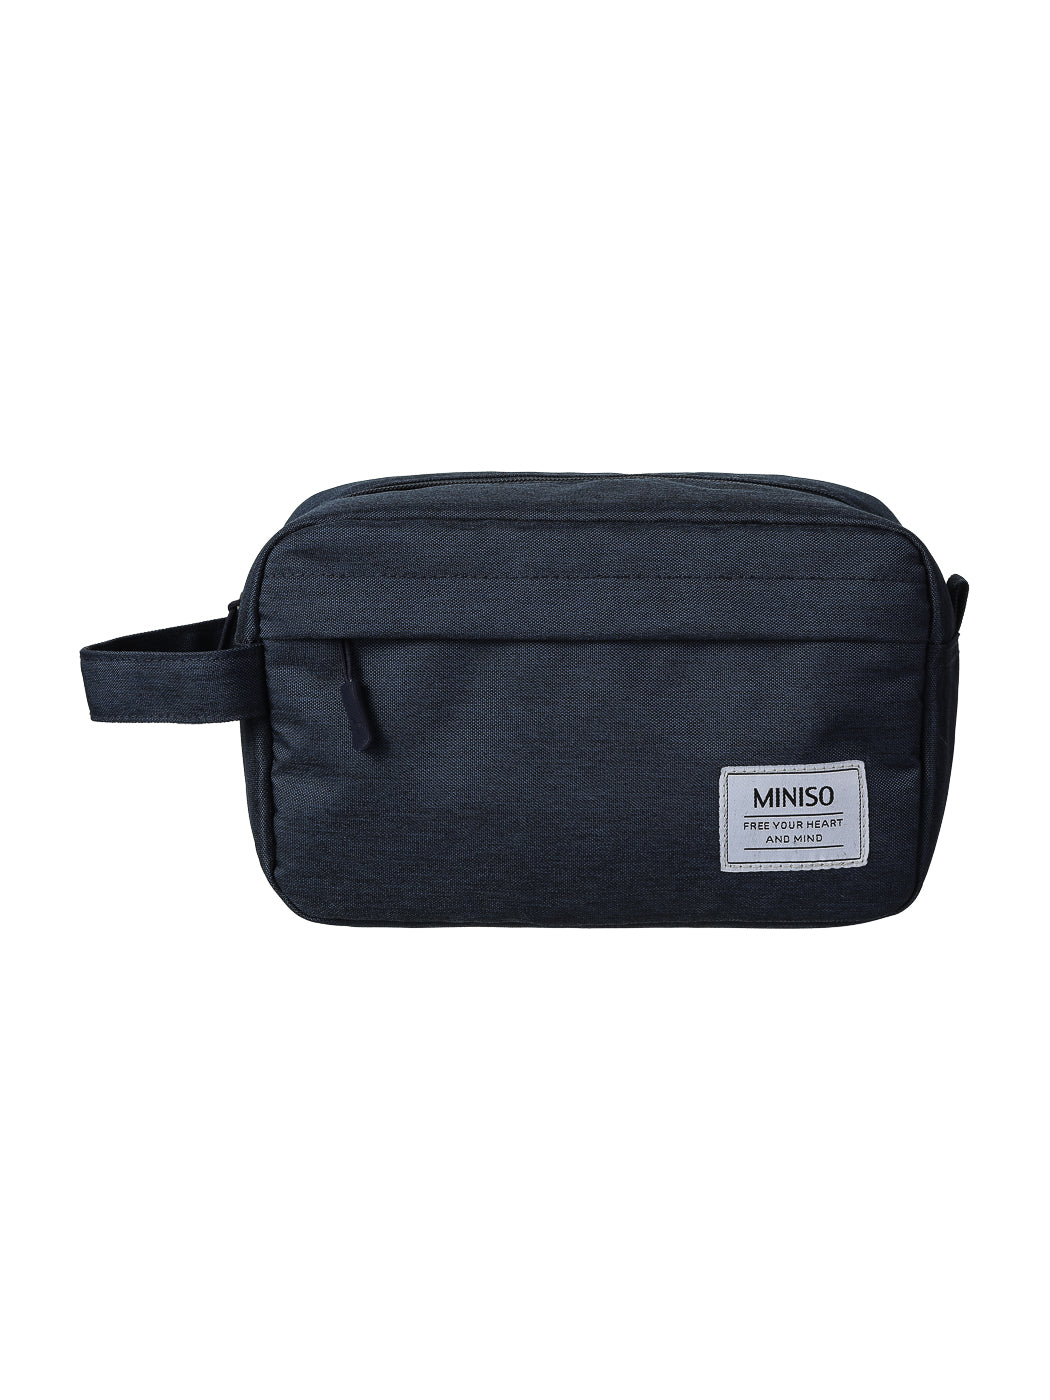 MINISO YOUTH OF THE TIME STORAGE BAG(NAVY BLUE) 2010861010108 TRAVEL STORAGE BAG-3